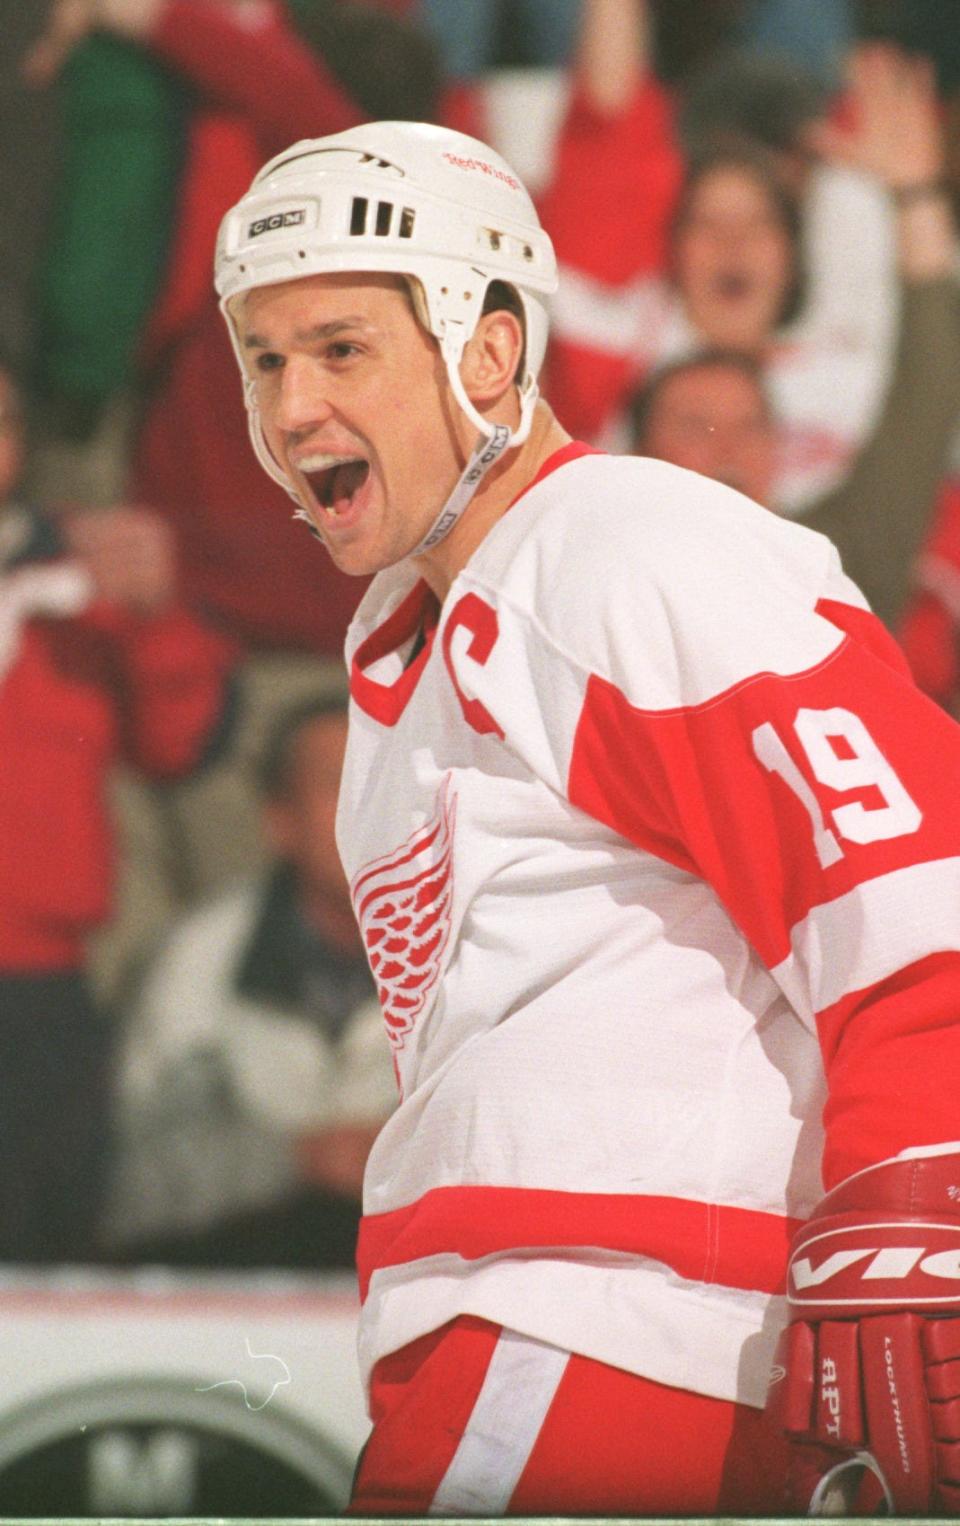 Detroit Red Wings' Steve Yzerman celebrates his nearly 90-foot slap shot vs. the St. Louis Blues for the first goal of the night during the first period in Game 5 of the first round playoff series at Joe Louis Arena, April 25, 1997.